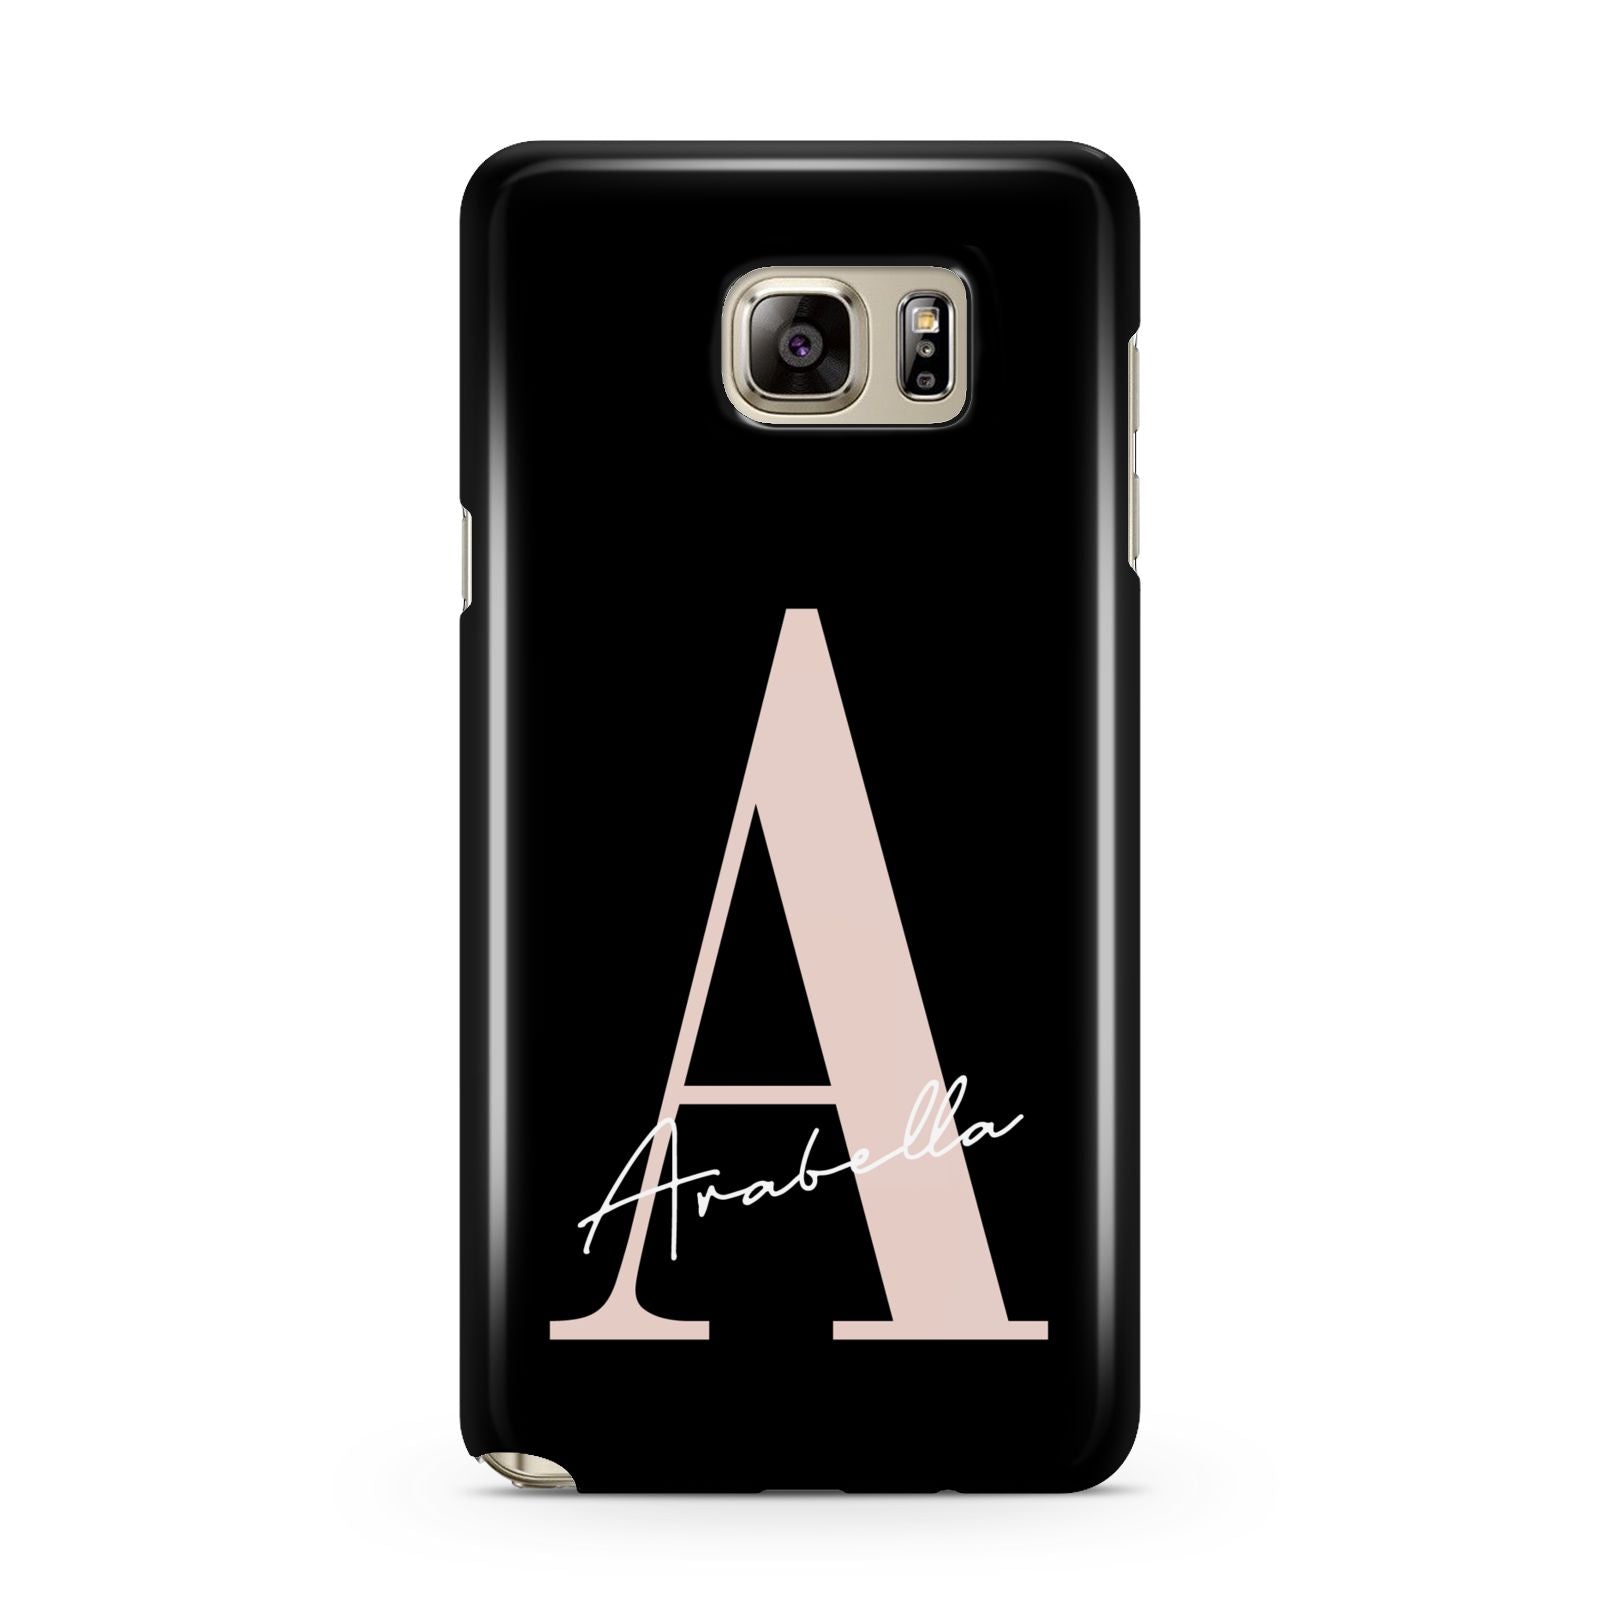 Personalised Black Pink Initial Samsung Galaxy Note 5 Case